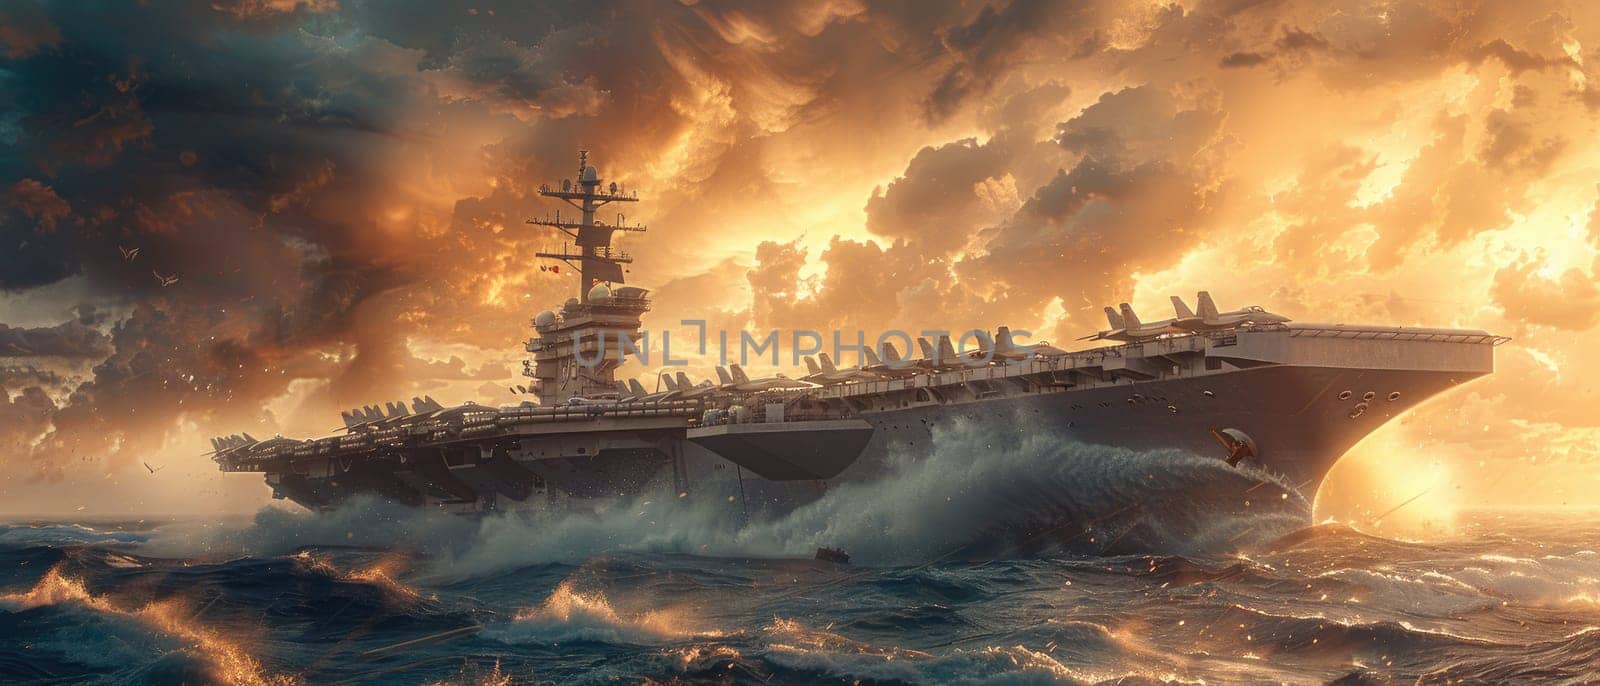 A large ship is sailing in the ocean with a beautiful sunset in the background by AI generated image.